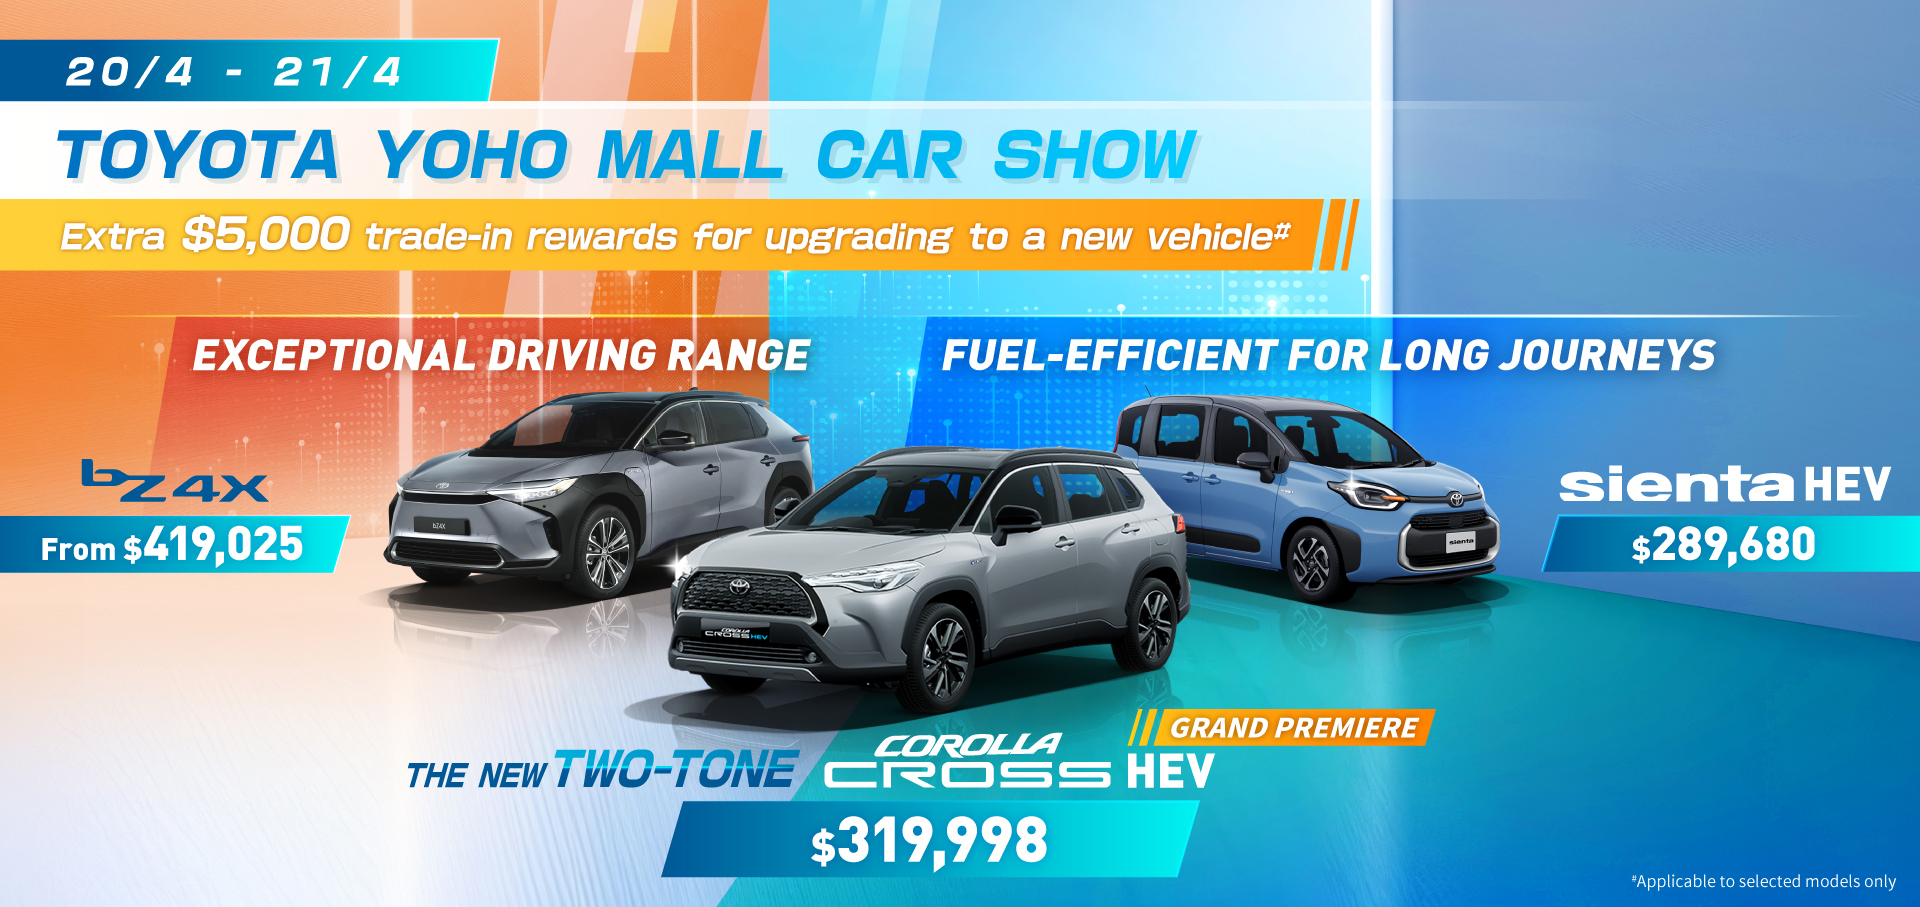 TOYOTA YOHO MALL CAR SHOW THIS WEEKEND🔹MEET THE ALL-NEW TWO-TONE COROLLA CROSS